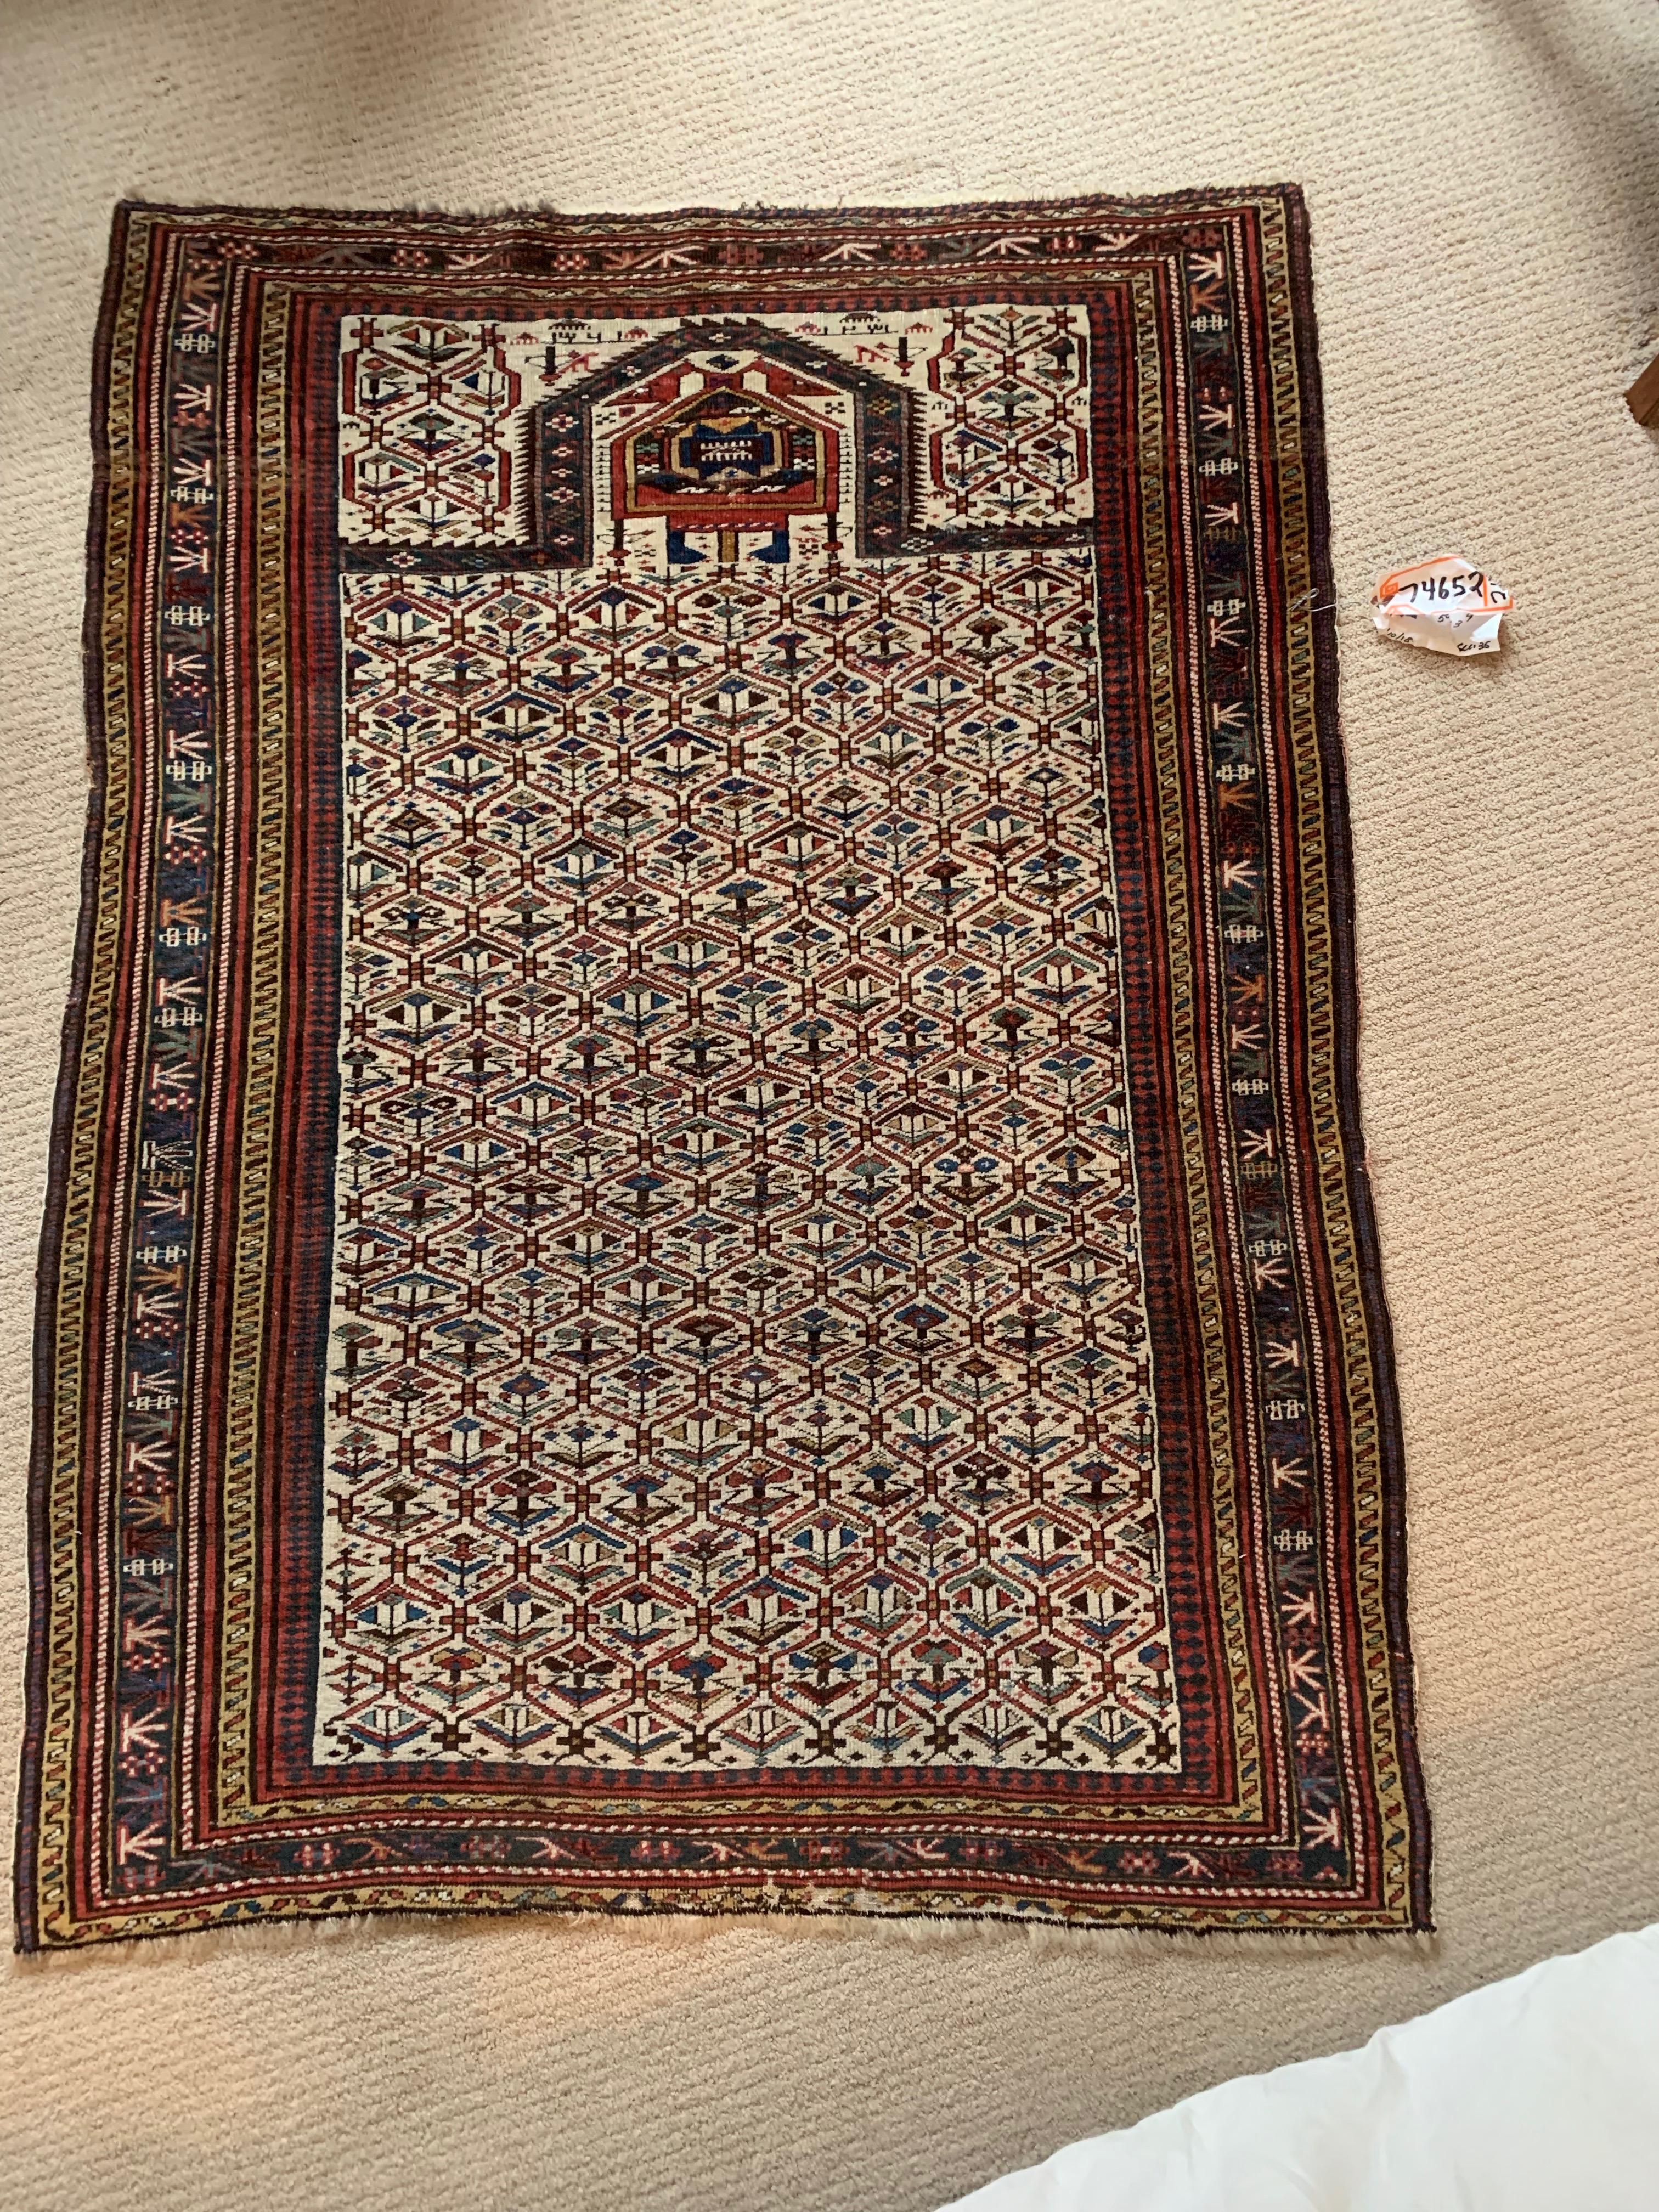 Beautiful and in great condition antique Caucasian Kuba Rug, 19th century, hand-knotted wool, vegetable dye. Wonderful condition, recently professionally hand cleaned by well-known professional antique rugs service company in NY so it is ready to